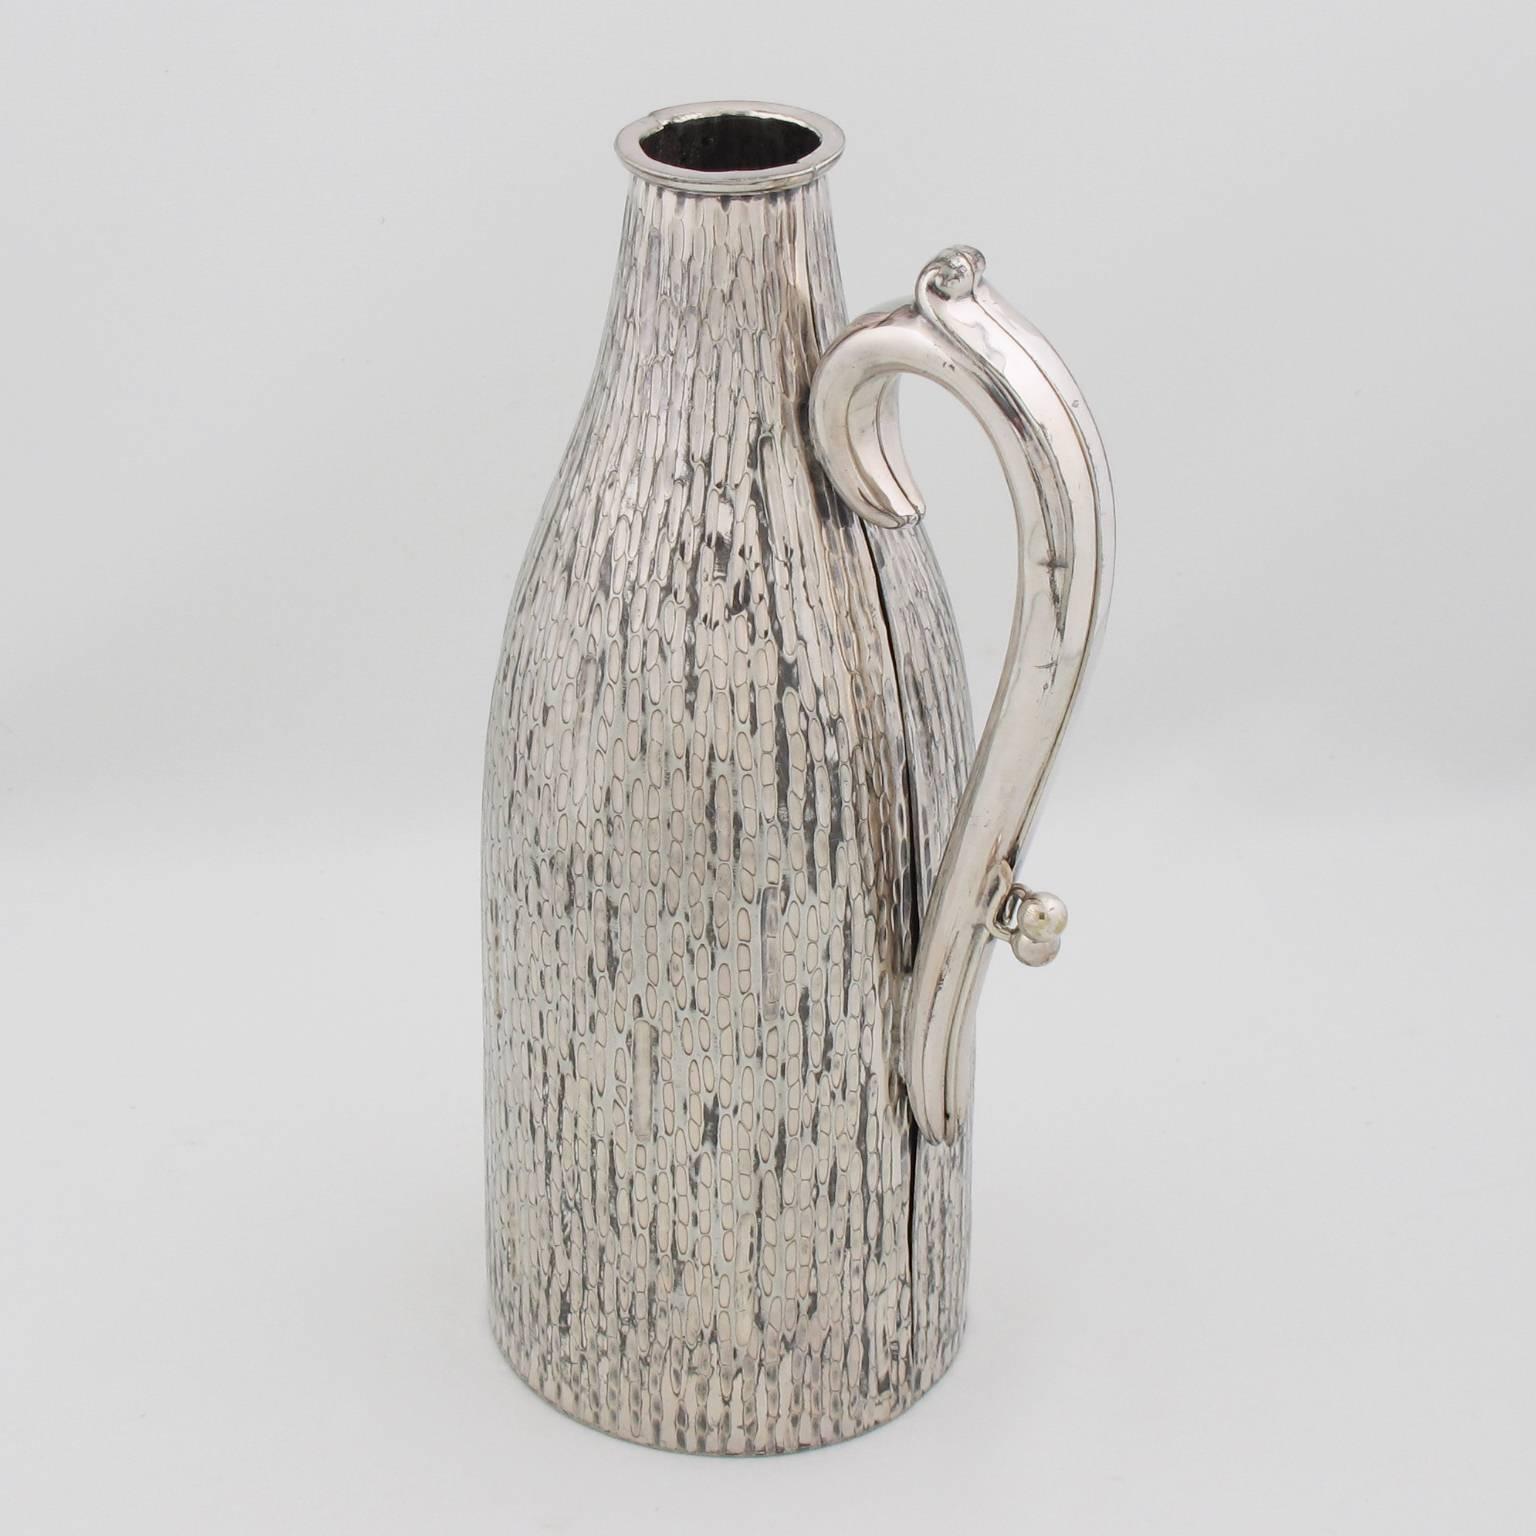 Extremely rare vintage Art Deco barware accessory, silver plate wine bottle cooler by Kirby Beard & Co, England / Paris, circa 1930s. Great modernist design with engraving and textured pattern throughout and carved large handle. The cooler splits in